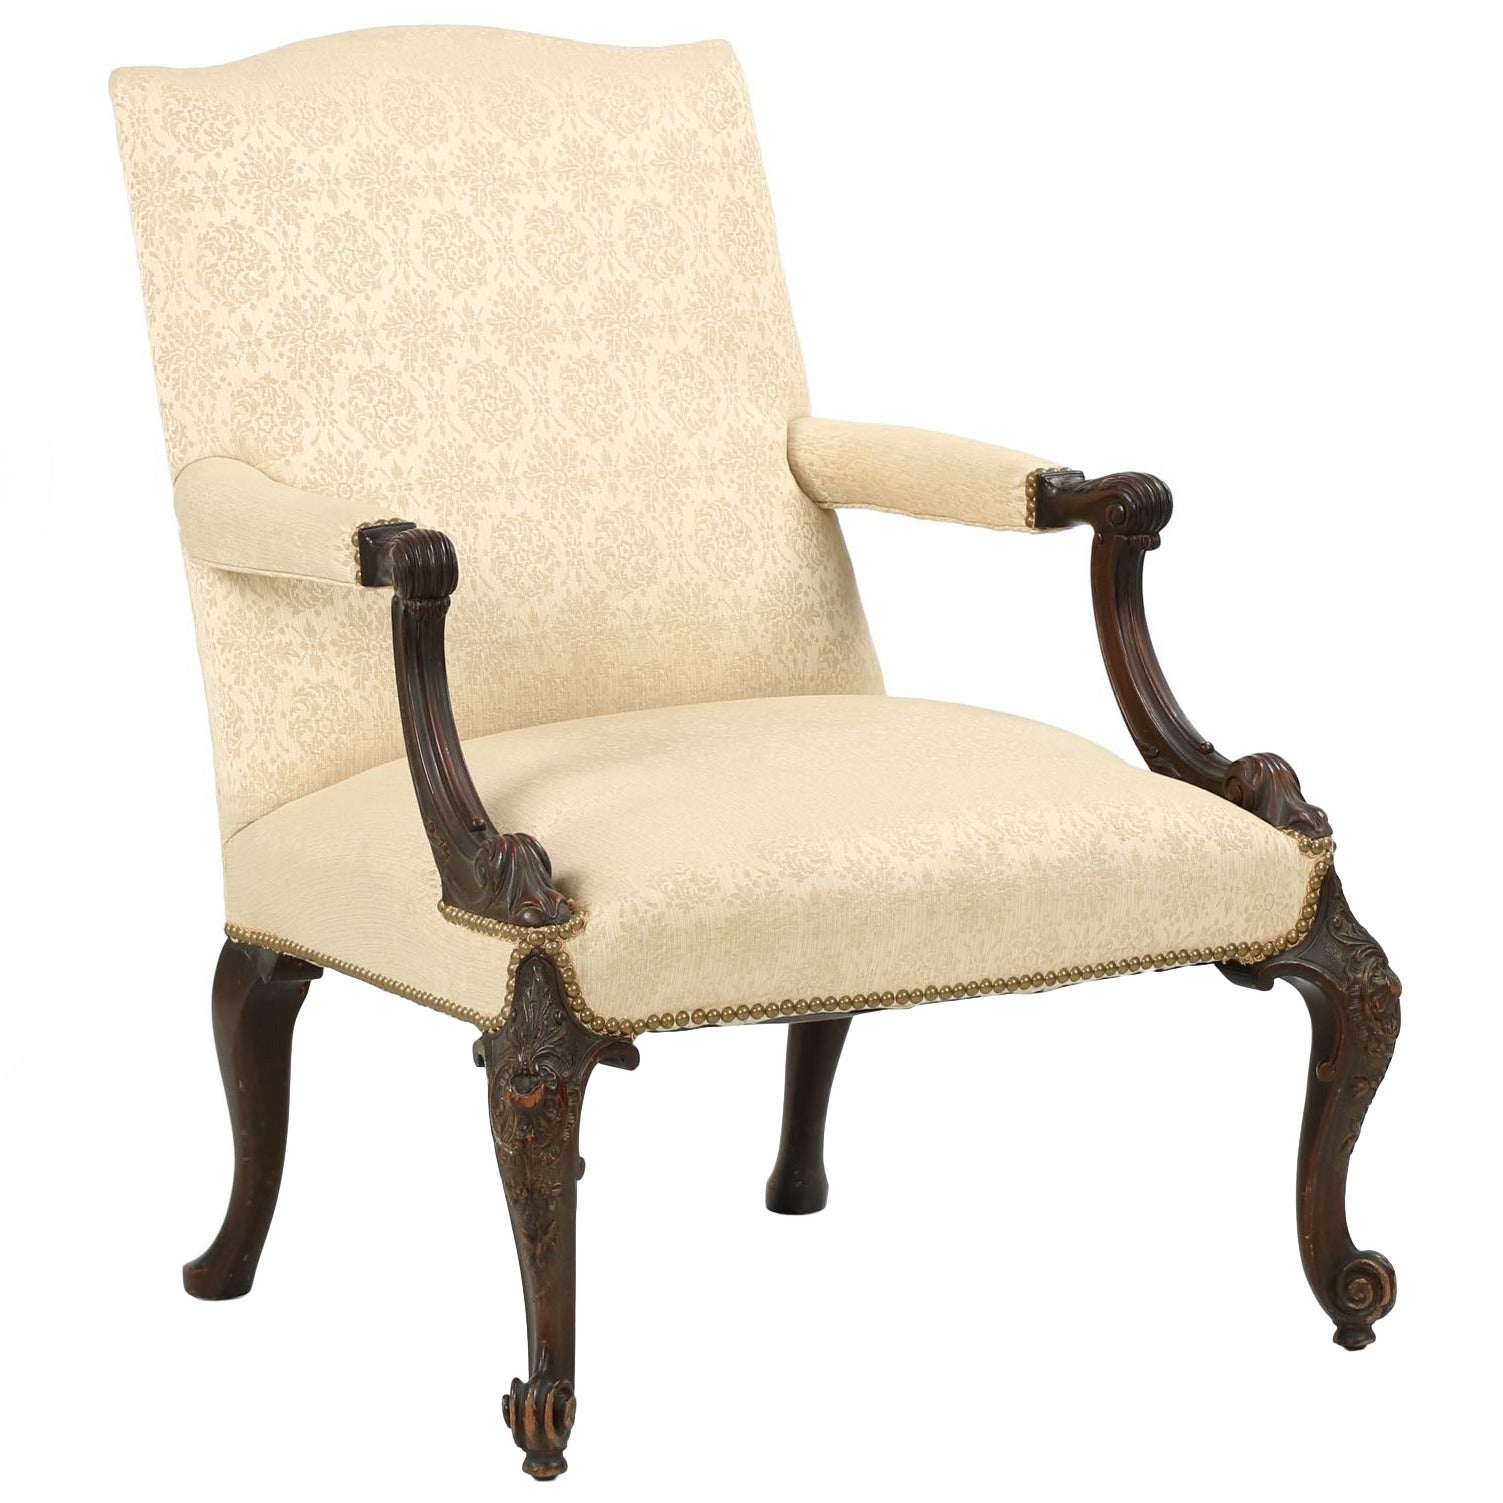 English Chippendale Style Mahogany Open Arm Antique Chair, circa 1890